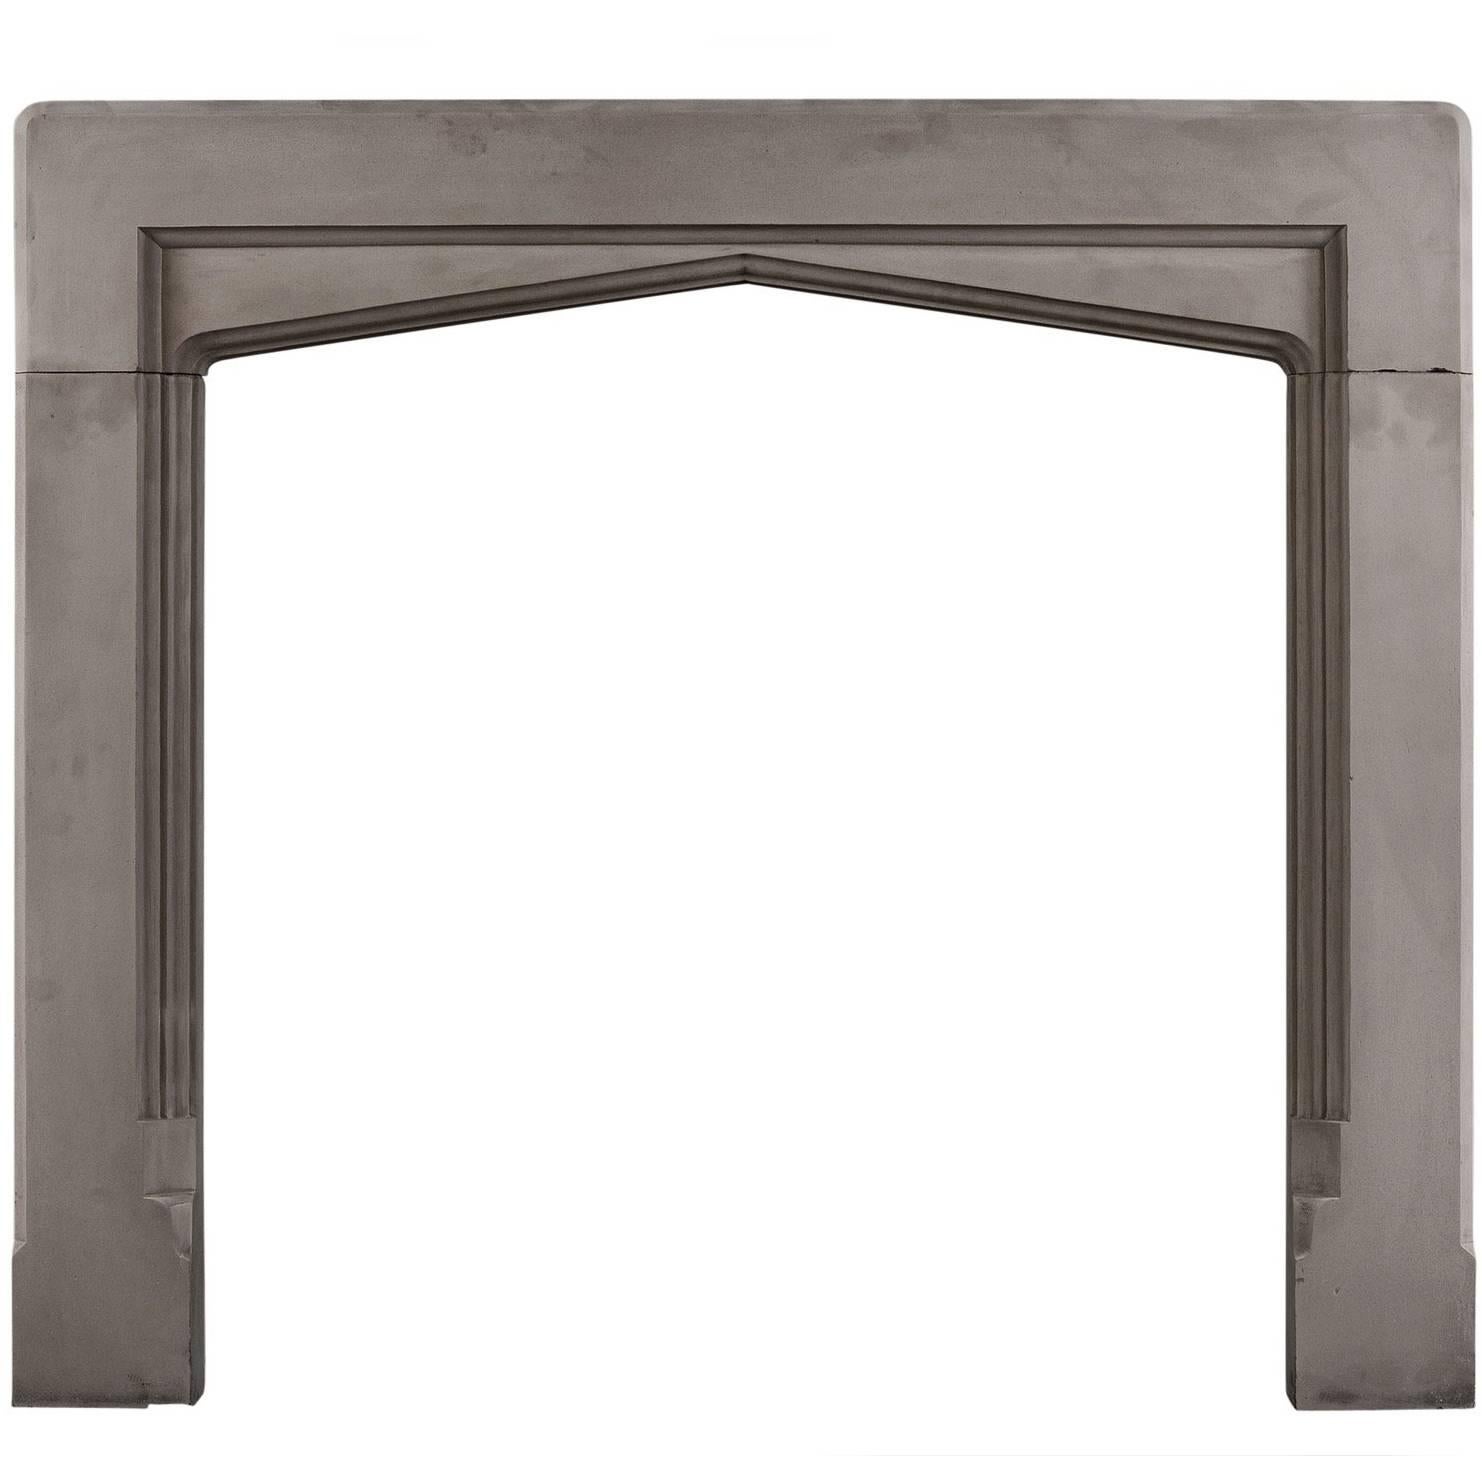 Small Gothic Style Fireplace in Purbeck Stone For Sale